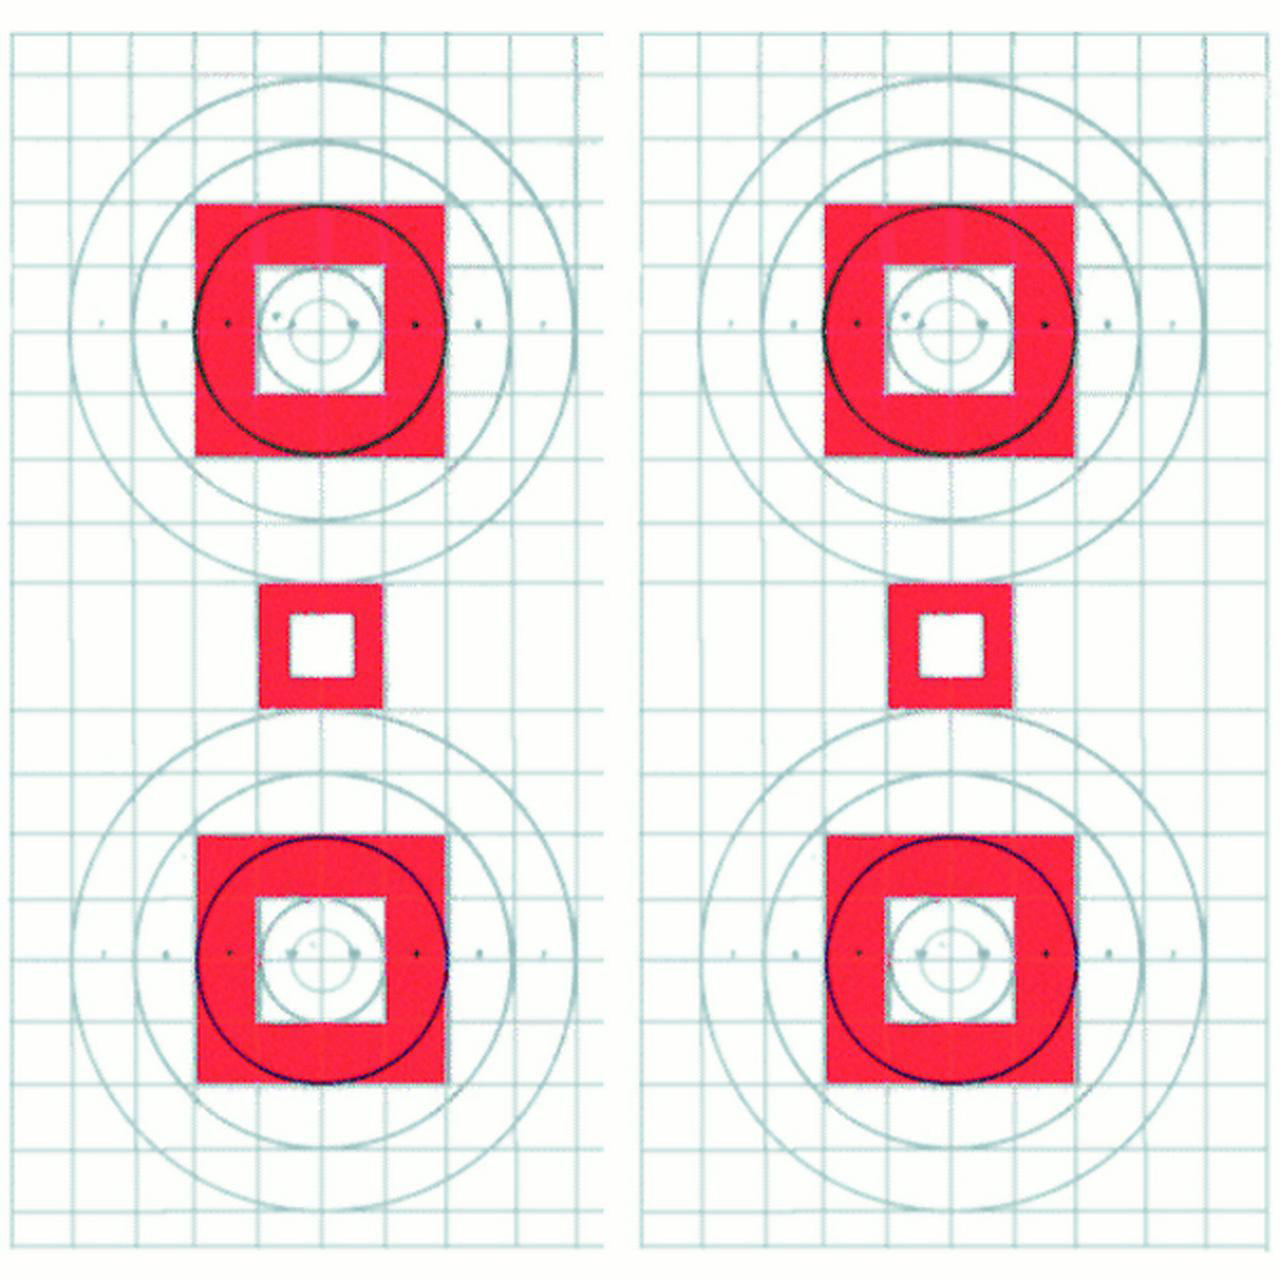 100 pcs of four bull s eye rifle sighting target on heavy paper red center with 1 gray grid size 20 1 2 x 25 walmart com